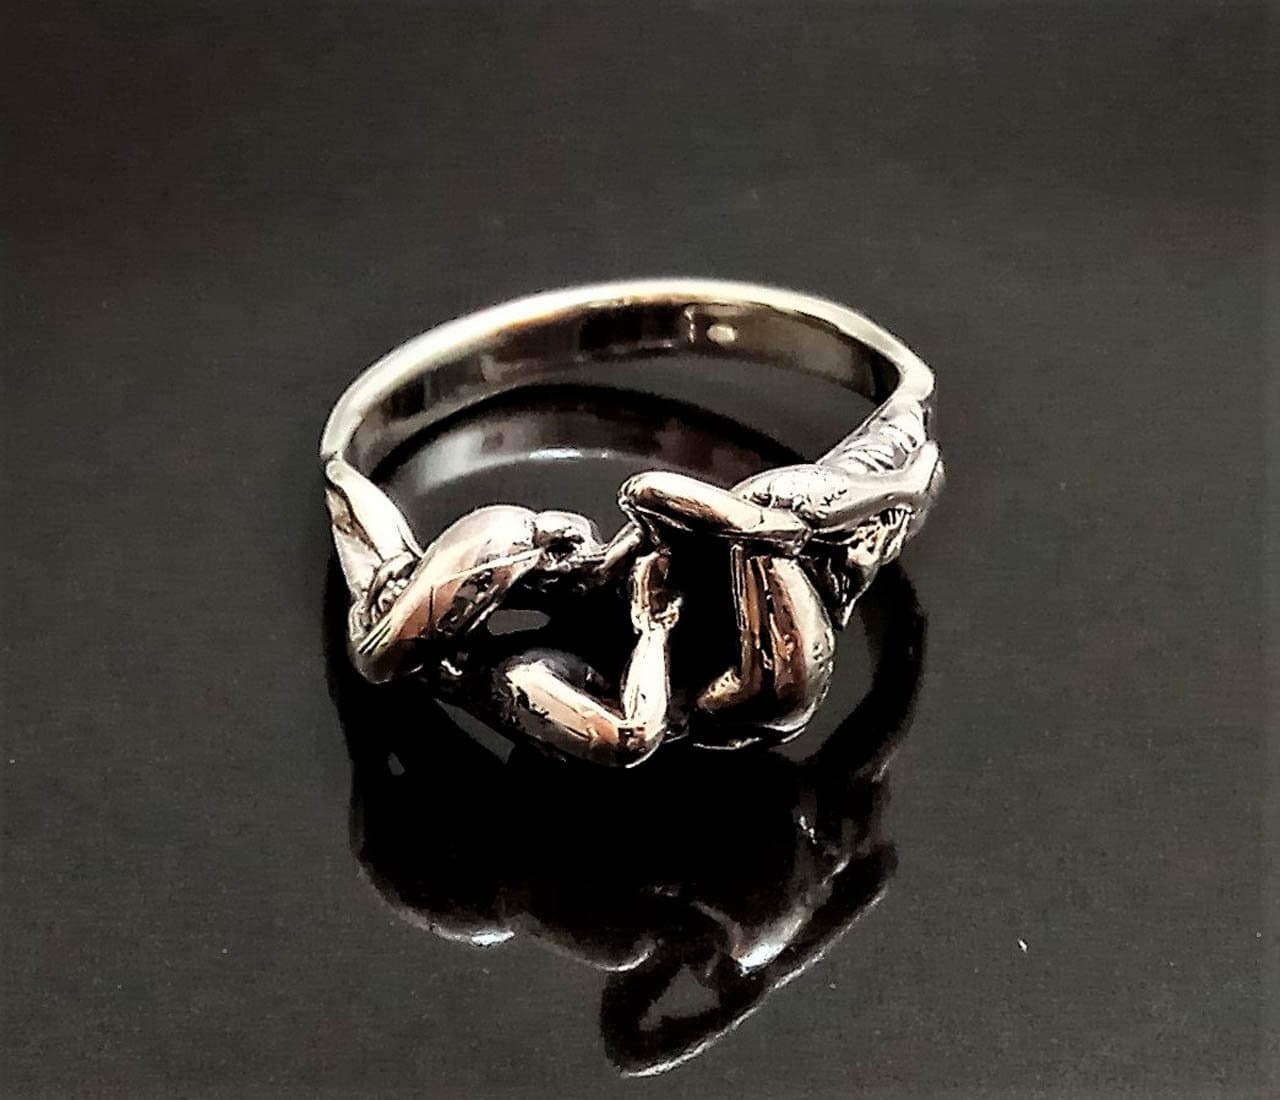 Erotic Ring Sterling Silver 925 Kama Sutra Pose 69 Sexy Ring Etsy